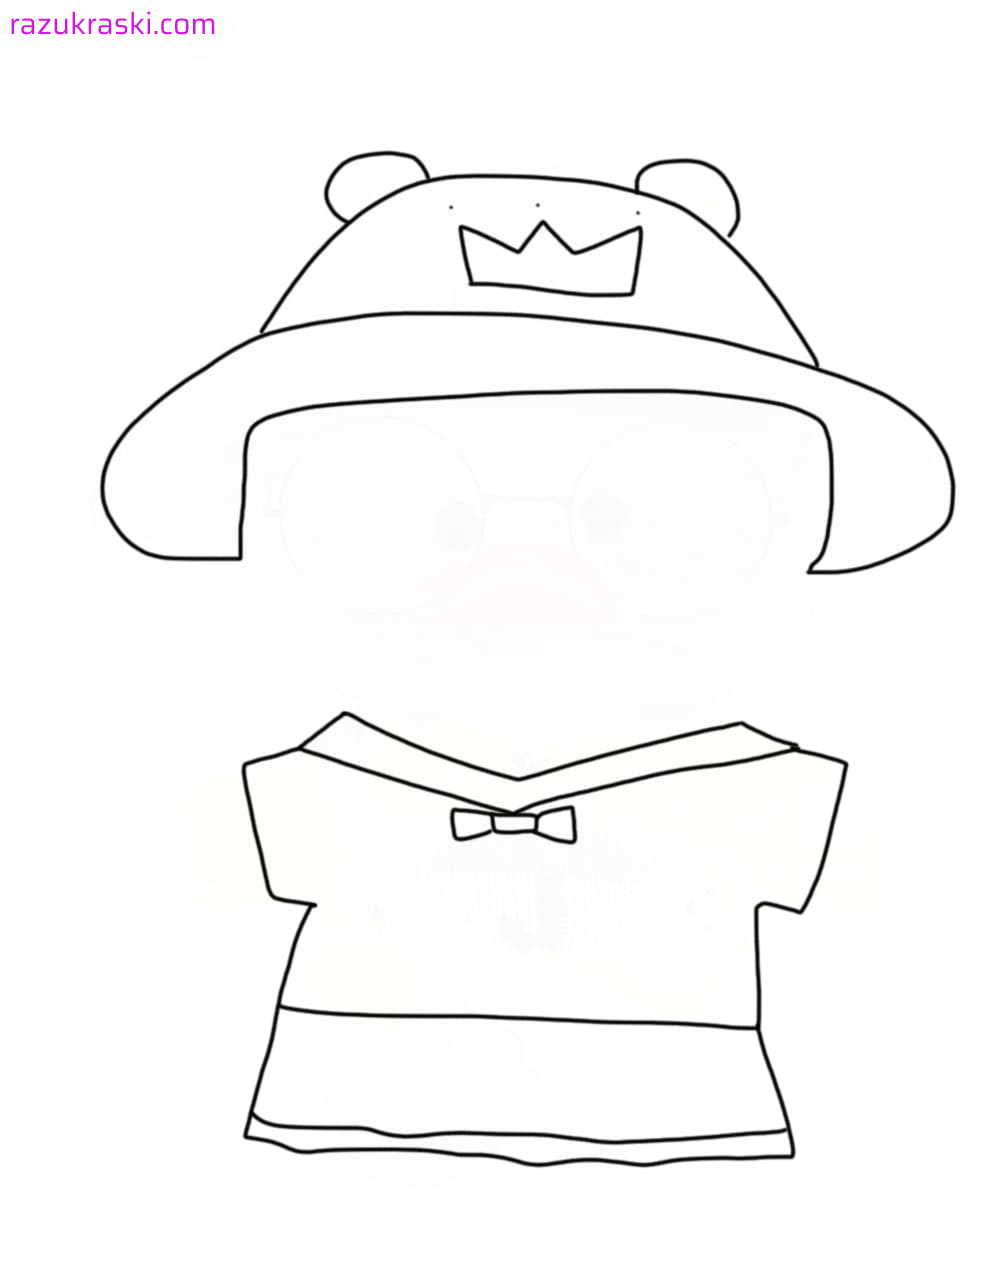 Coloring page Clothing for Lalafanfan Black and white duck clothes